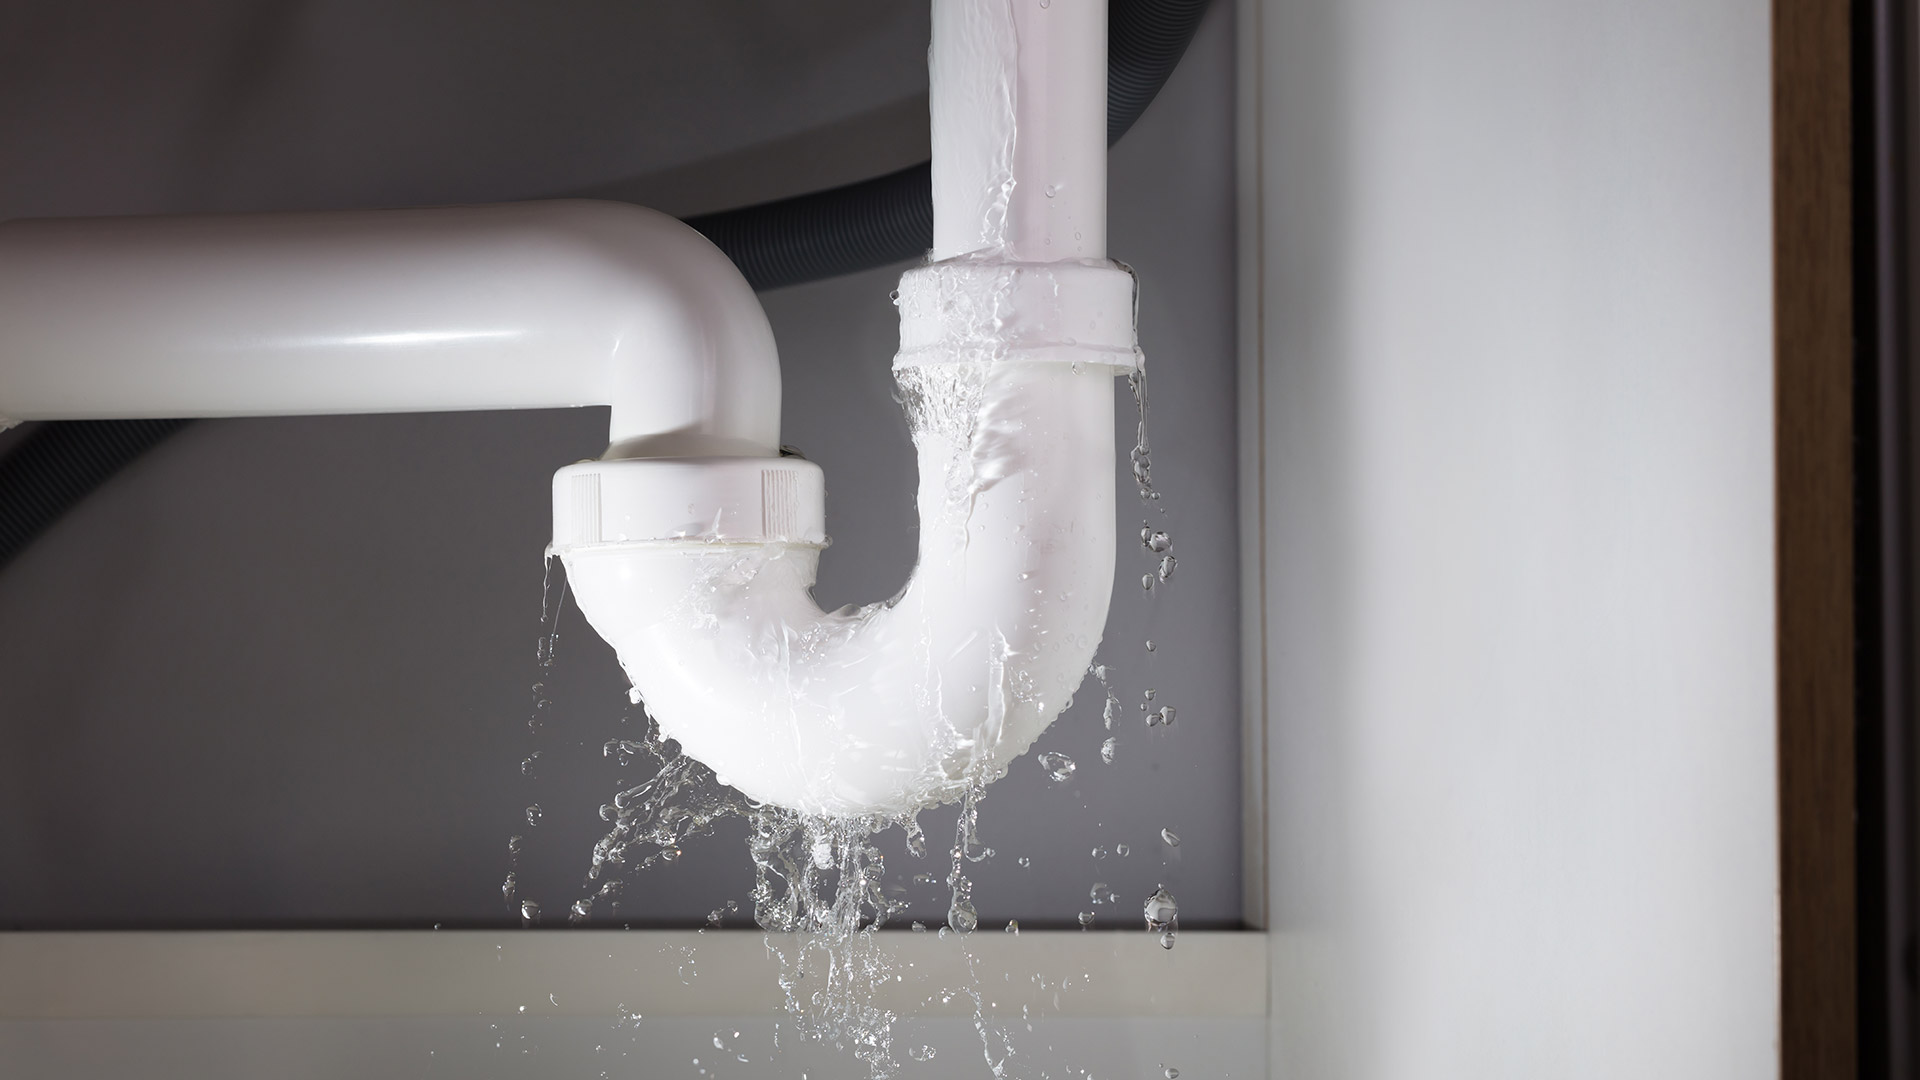 Plumbing Terms 101: A Guide to Industry Lingo